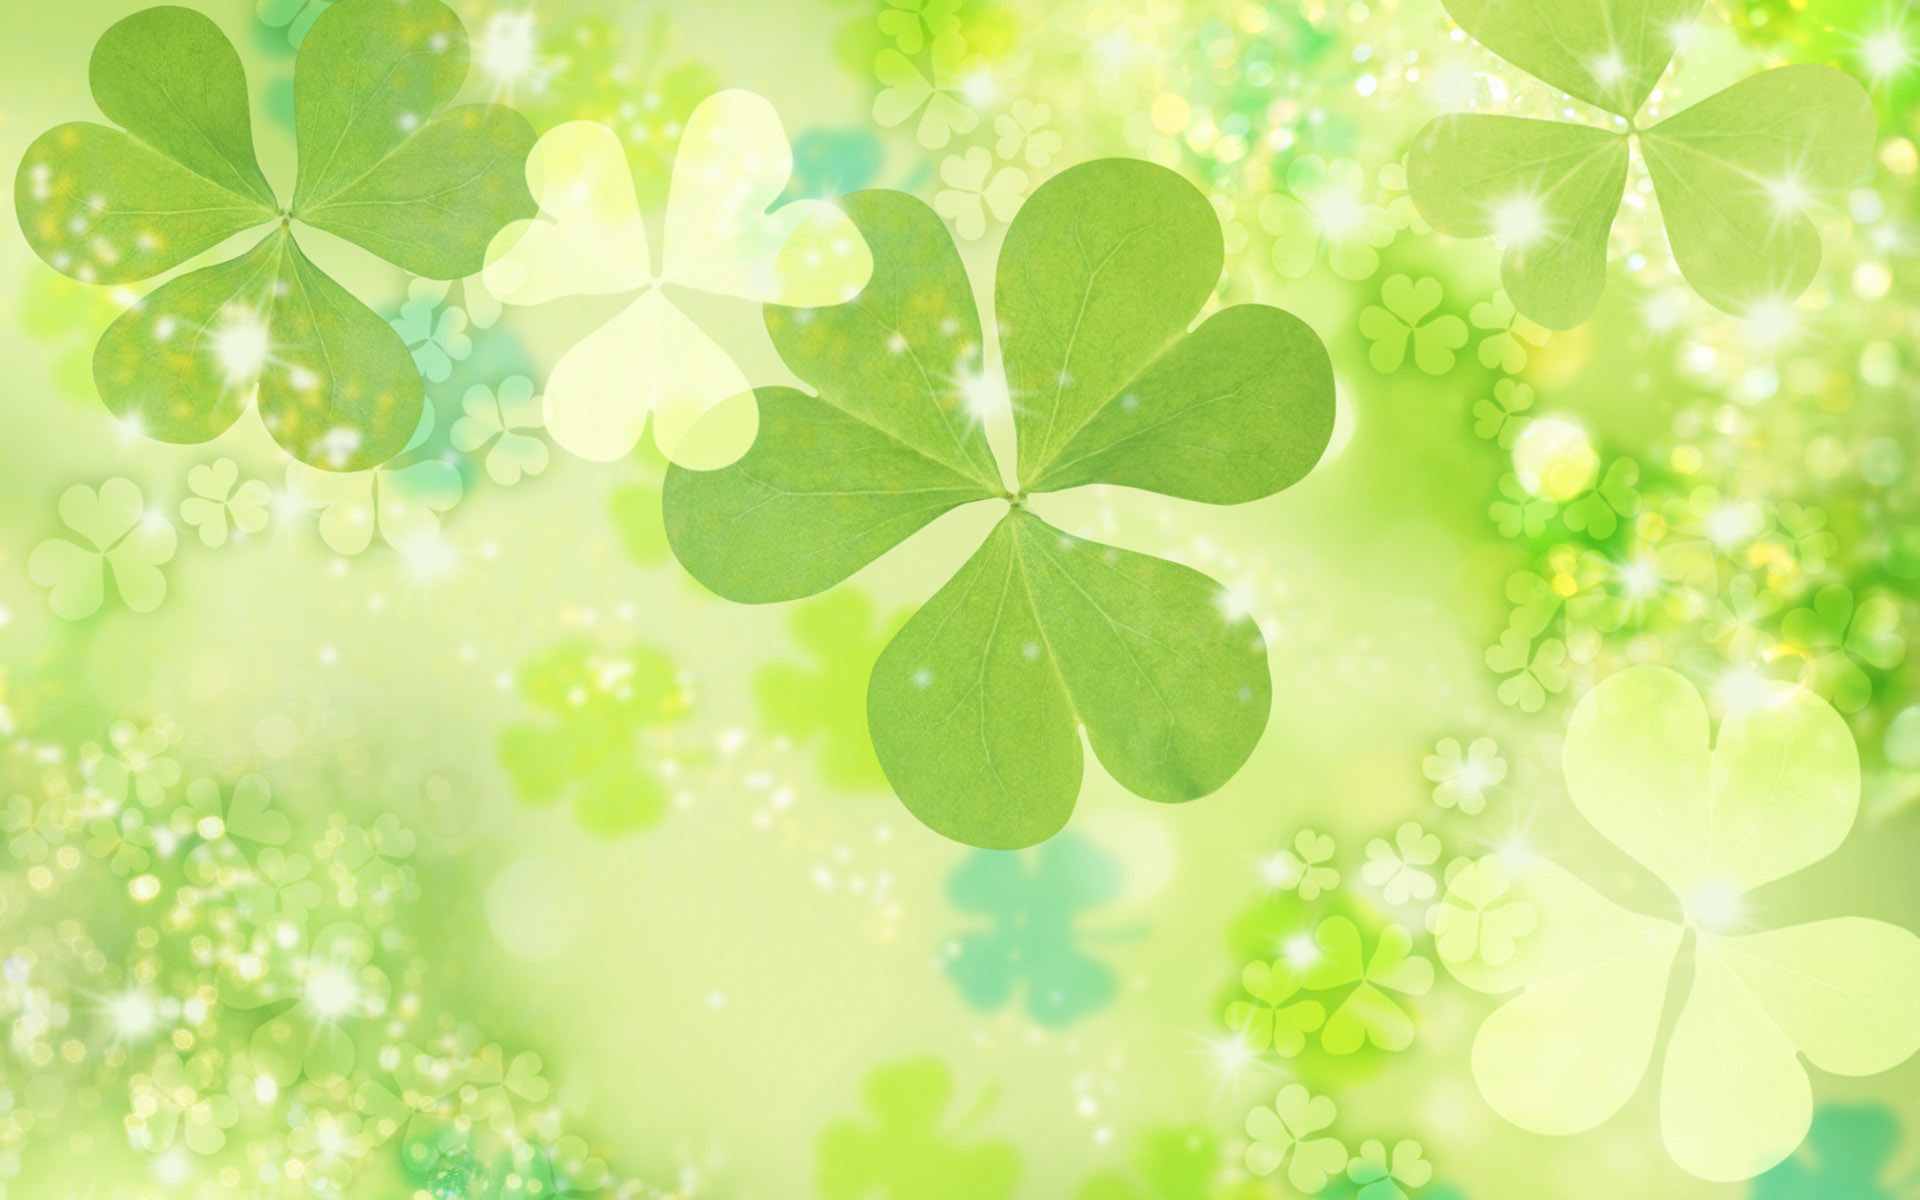 Saint Patrick&;s Day Wallpaper and Background. Download